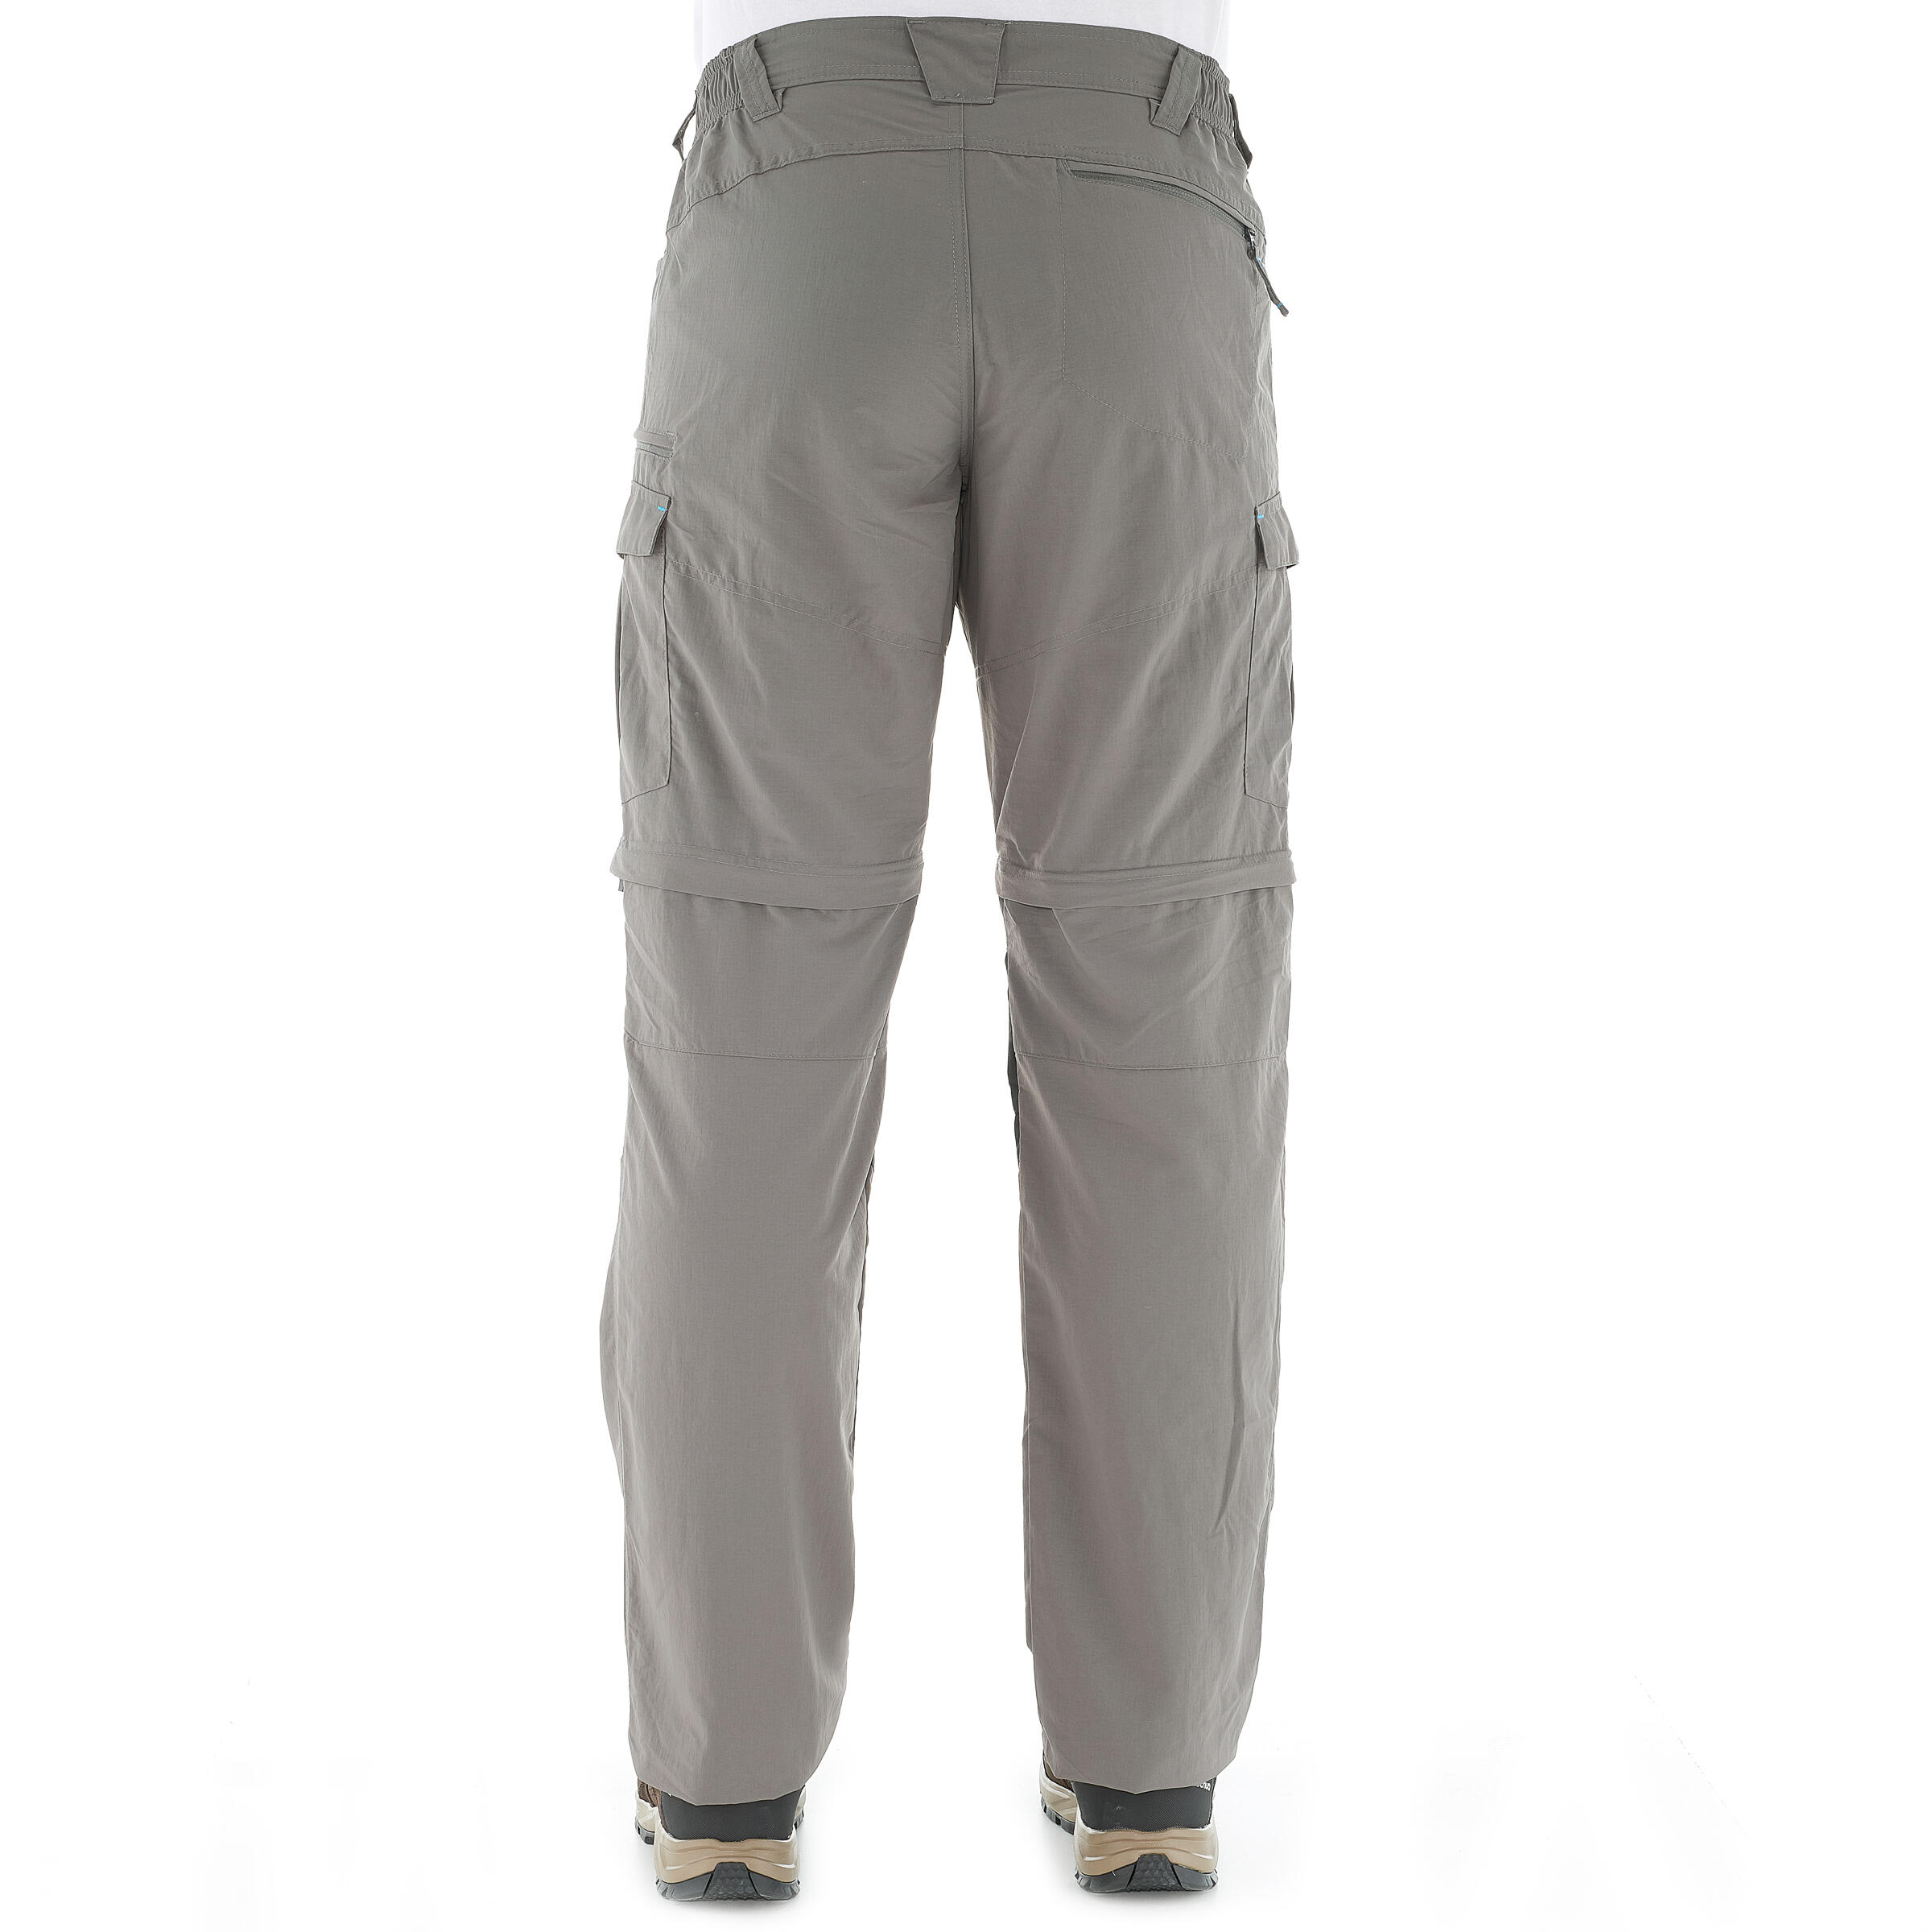 Forclaz 100 convertible hiking trousers - Light Grey 5/19